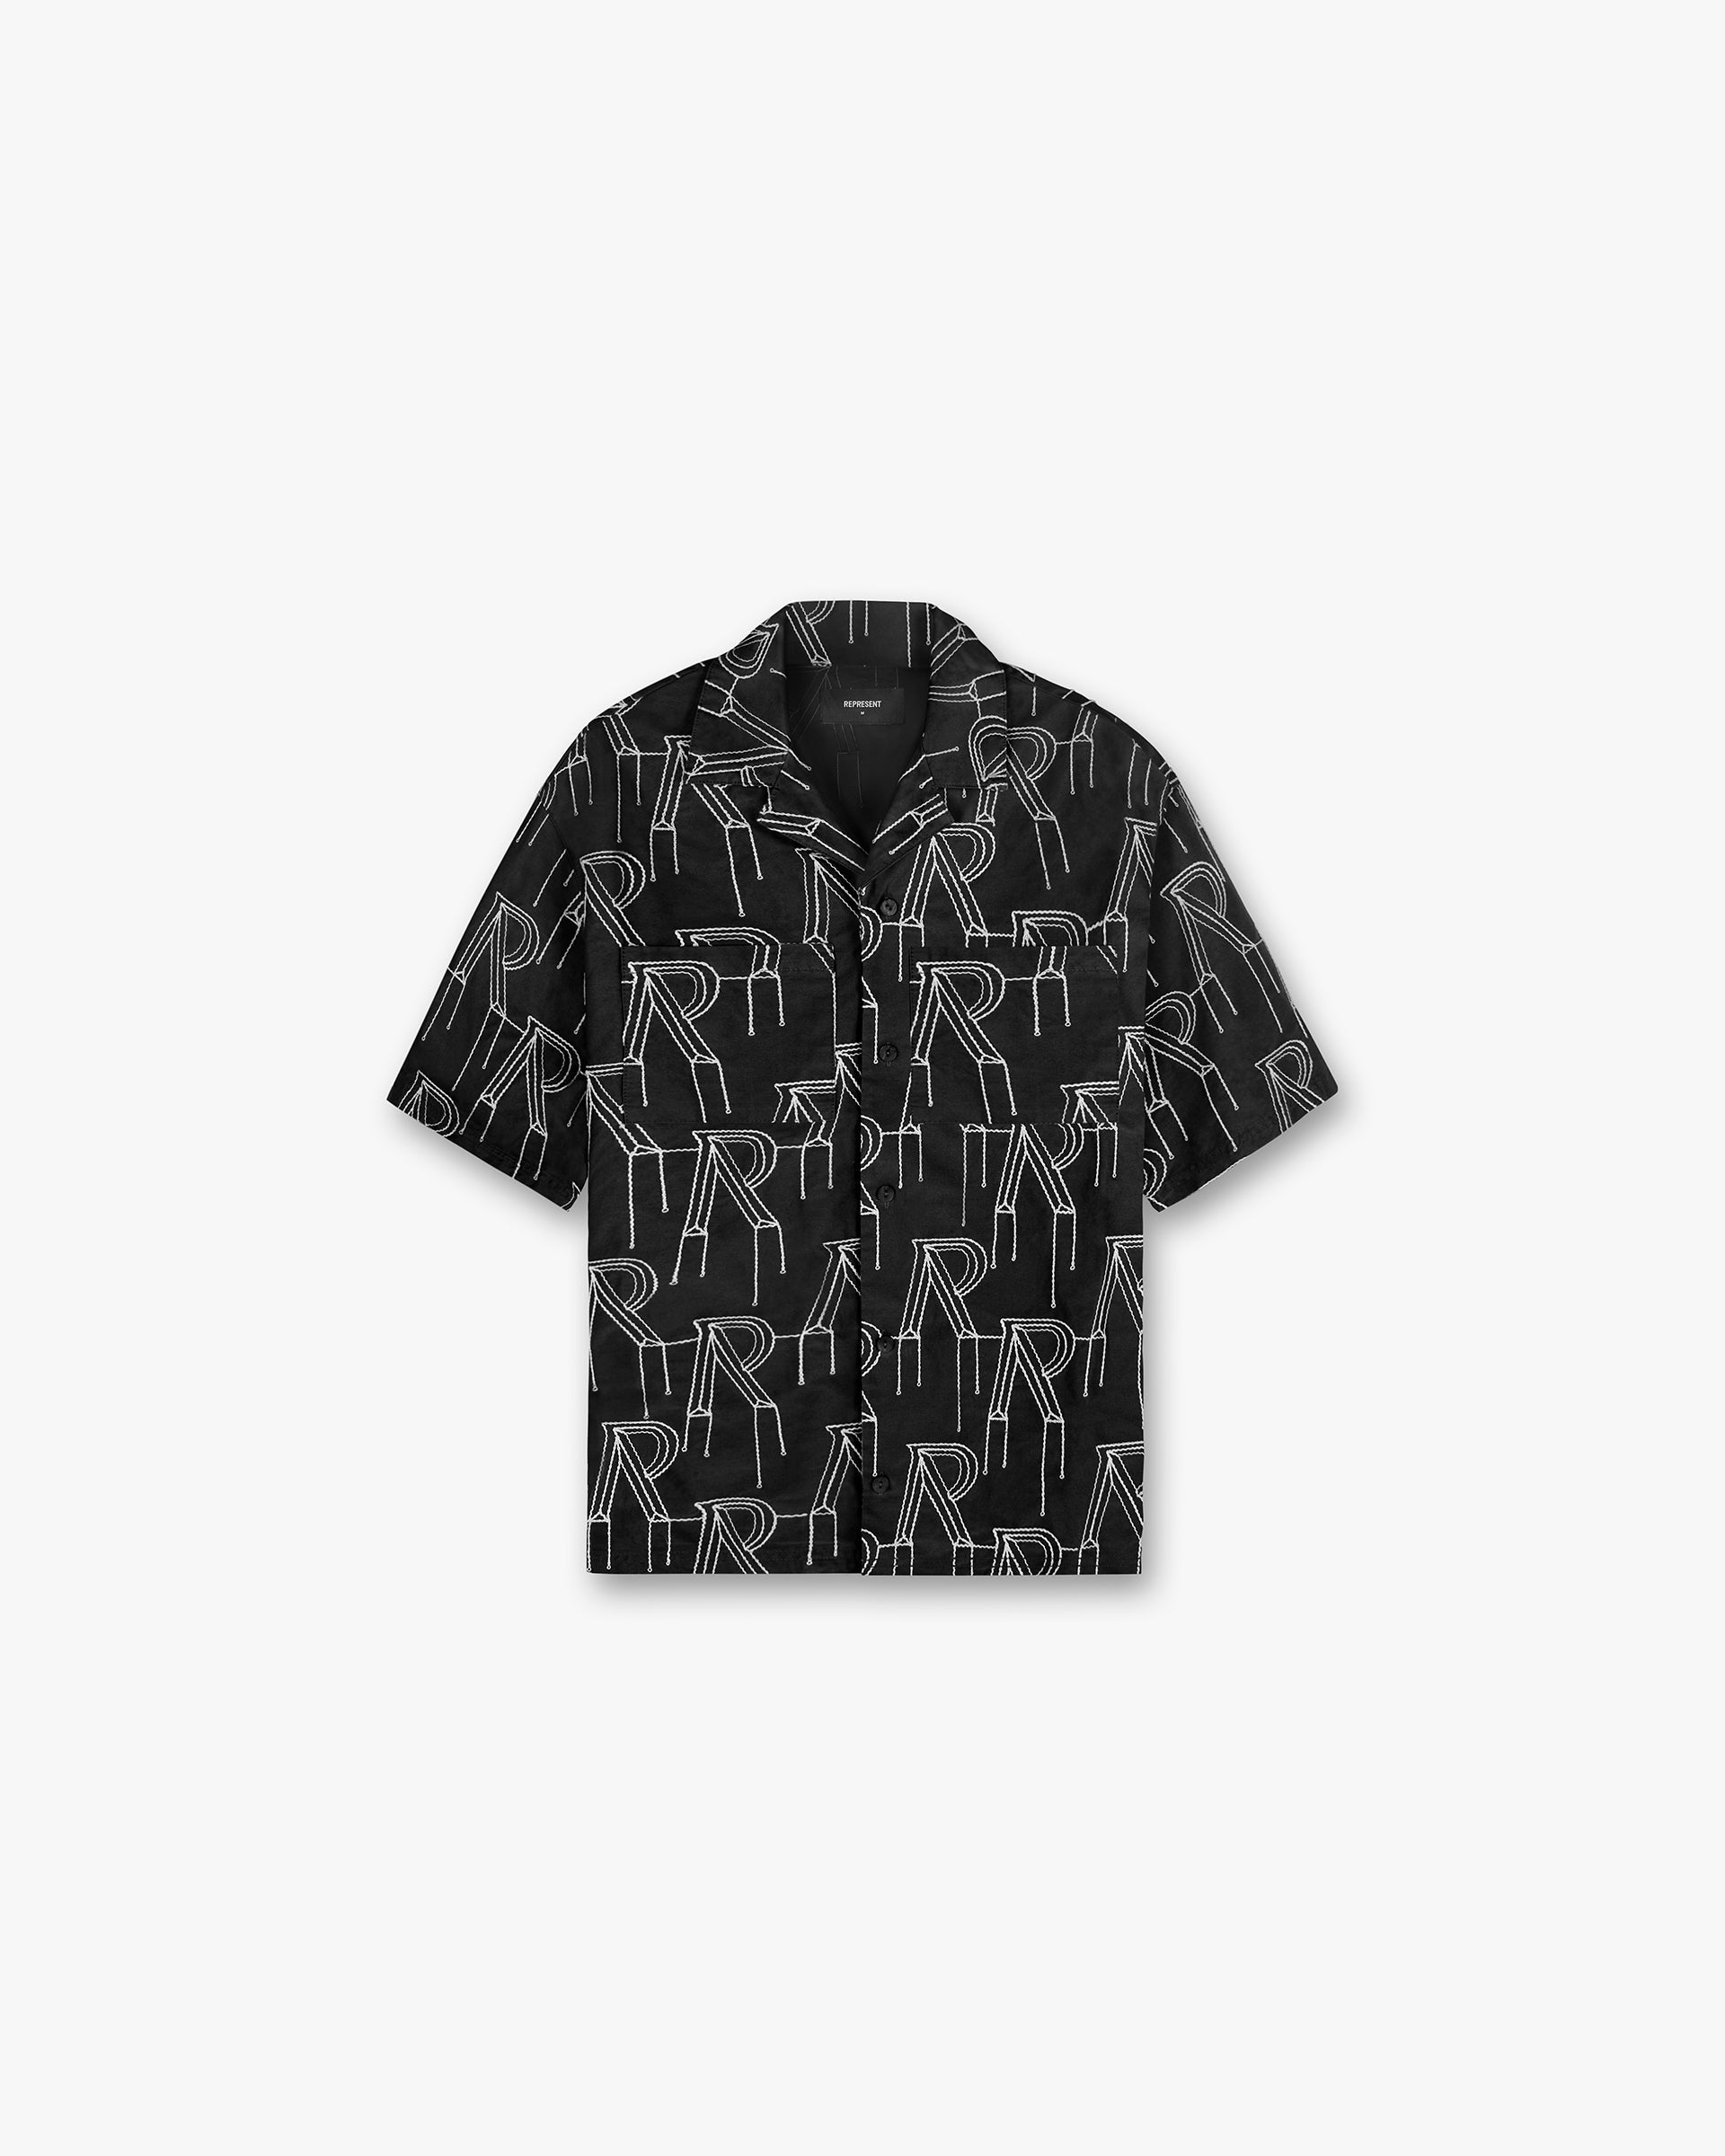 Embroidered Initial Overshirt - Black